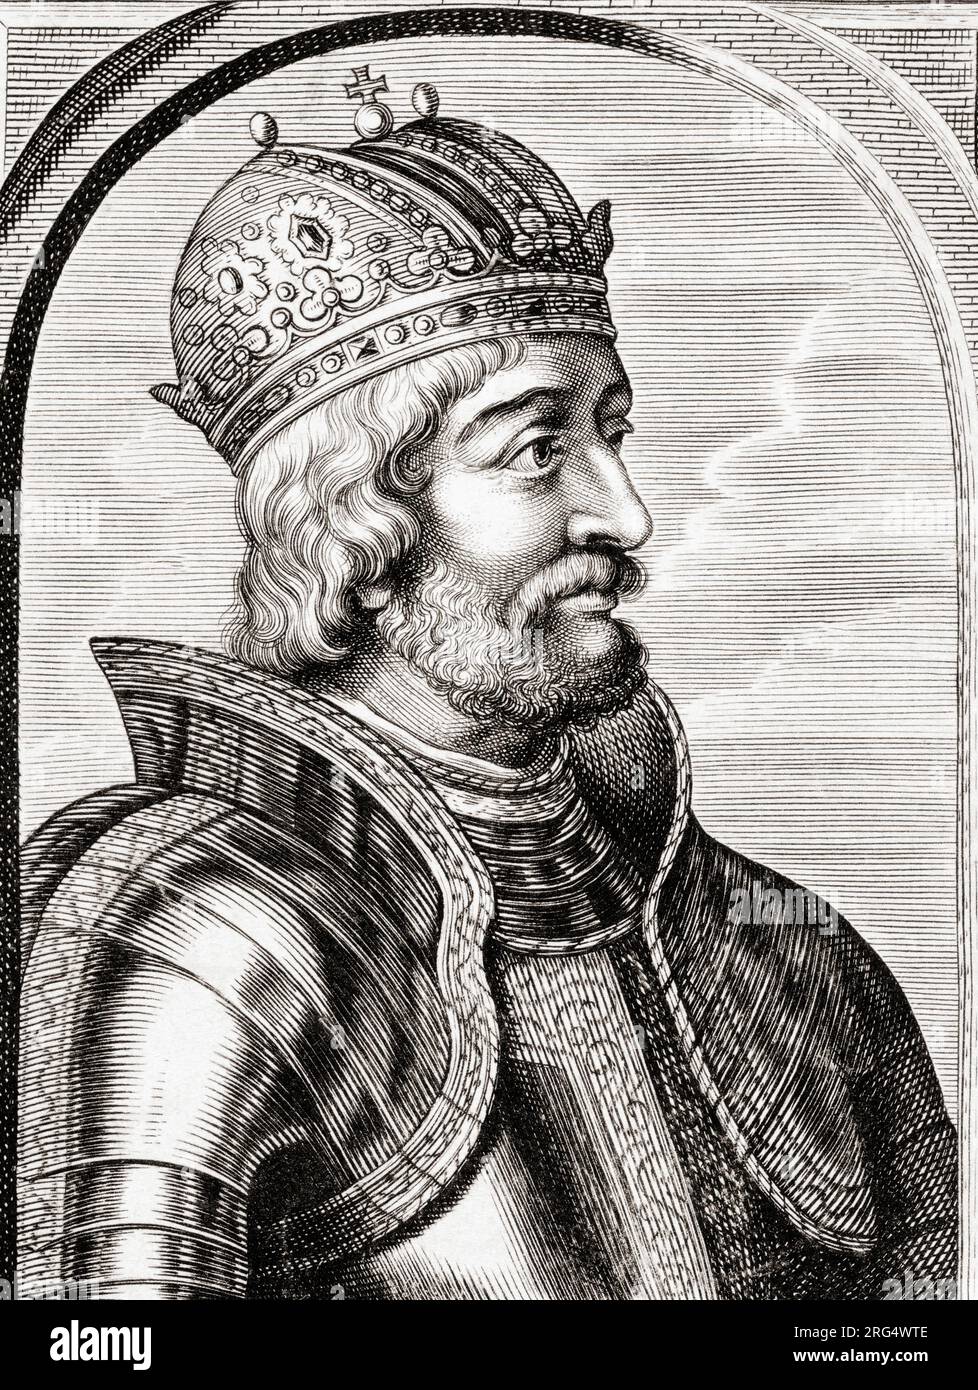 Charlemagne, also known as Charles the Great and Charles I, 747 - 814.  King of the Franks, King of the Lombards and Emperor of the Romans. After a 17th century engraving by Coenraet Waumans. Stock Photo